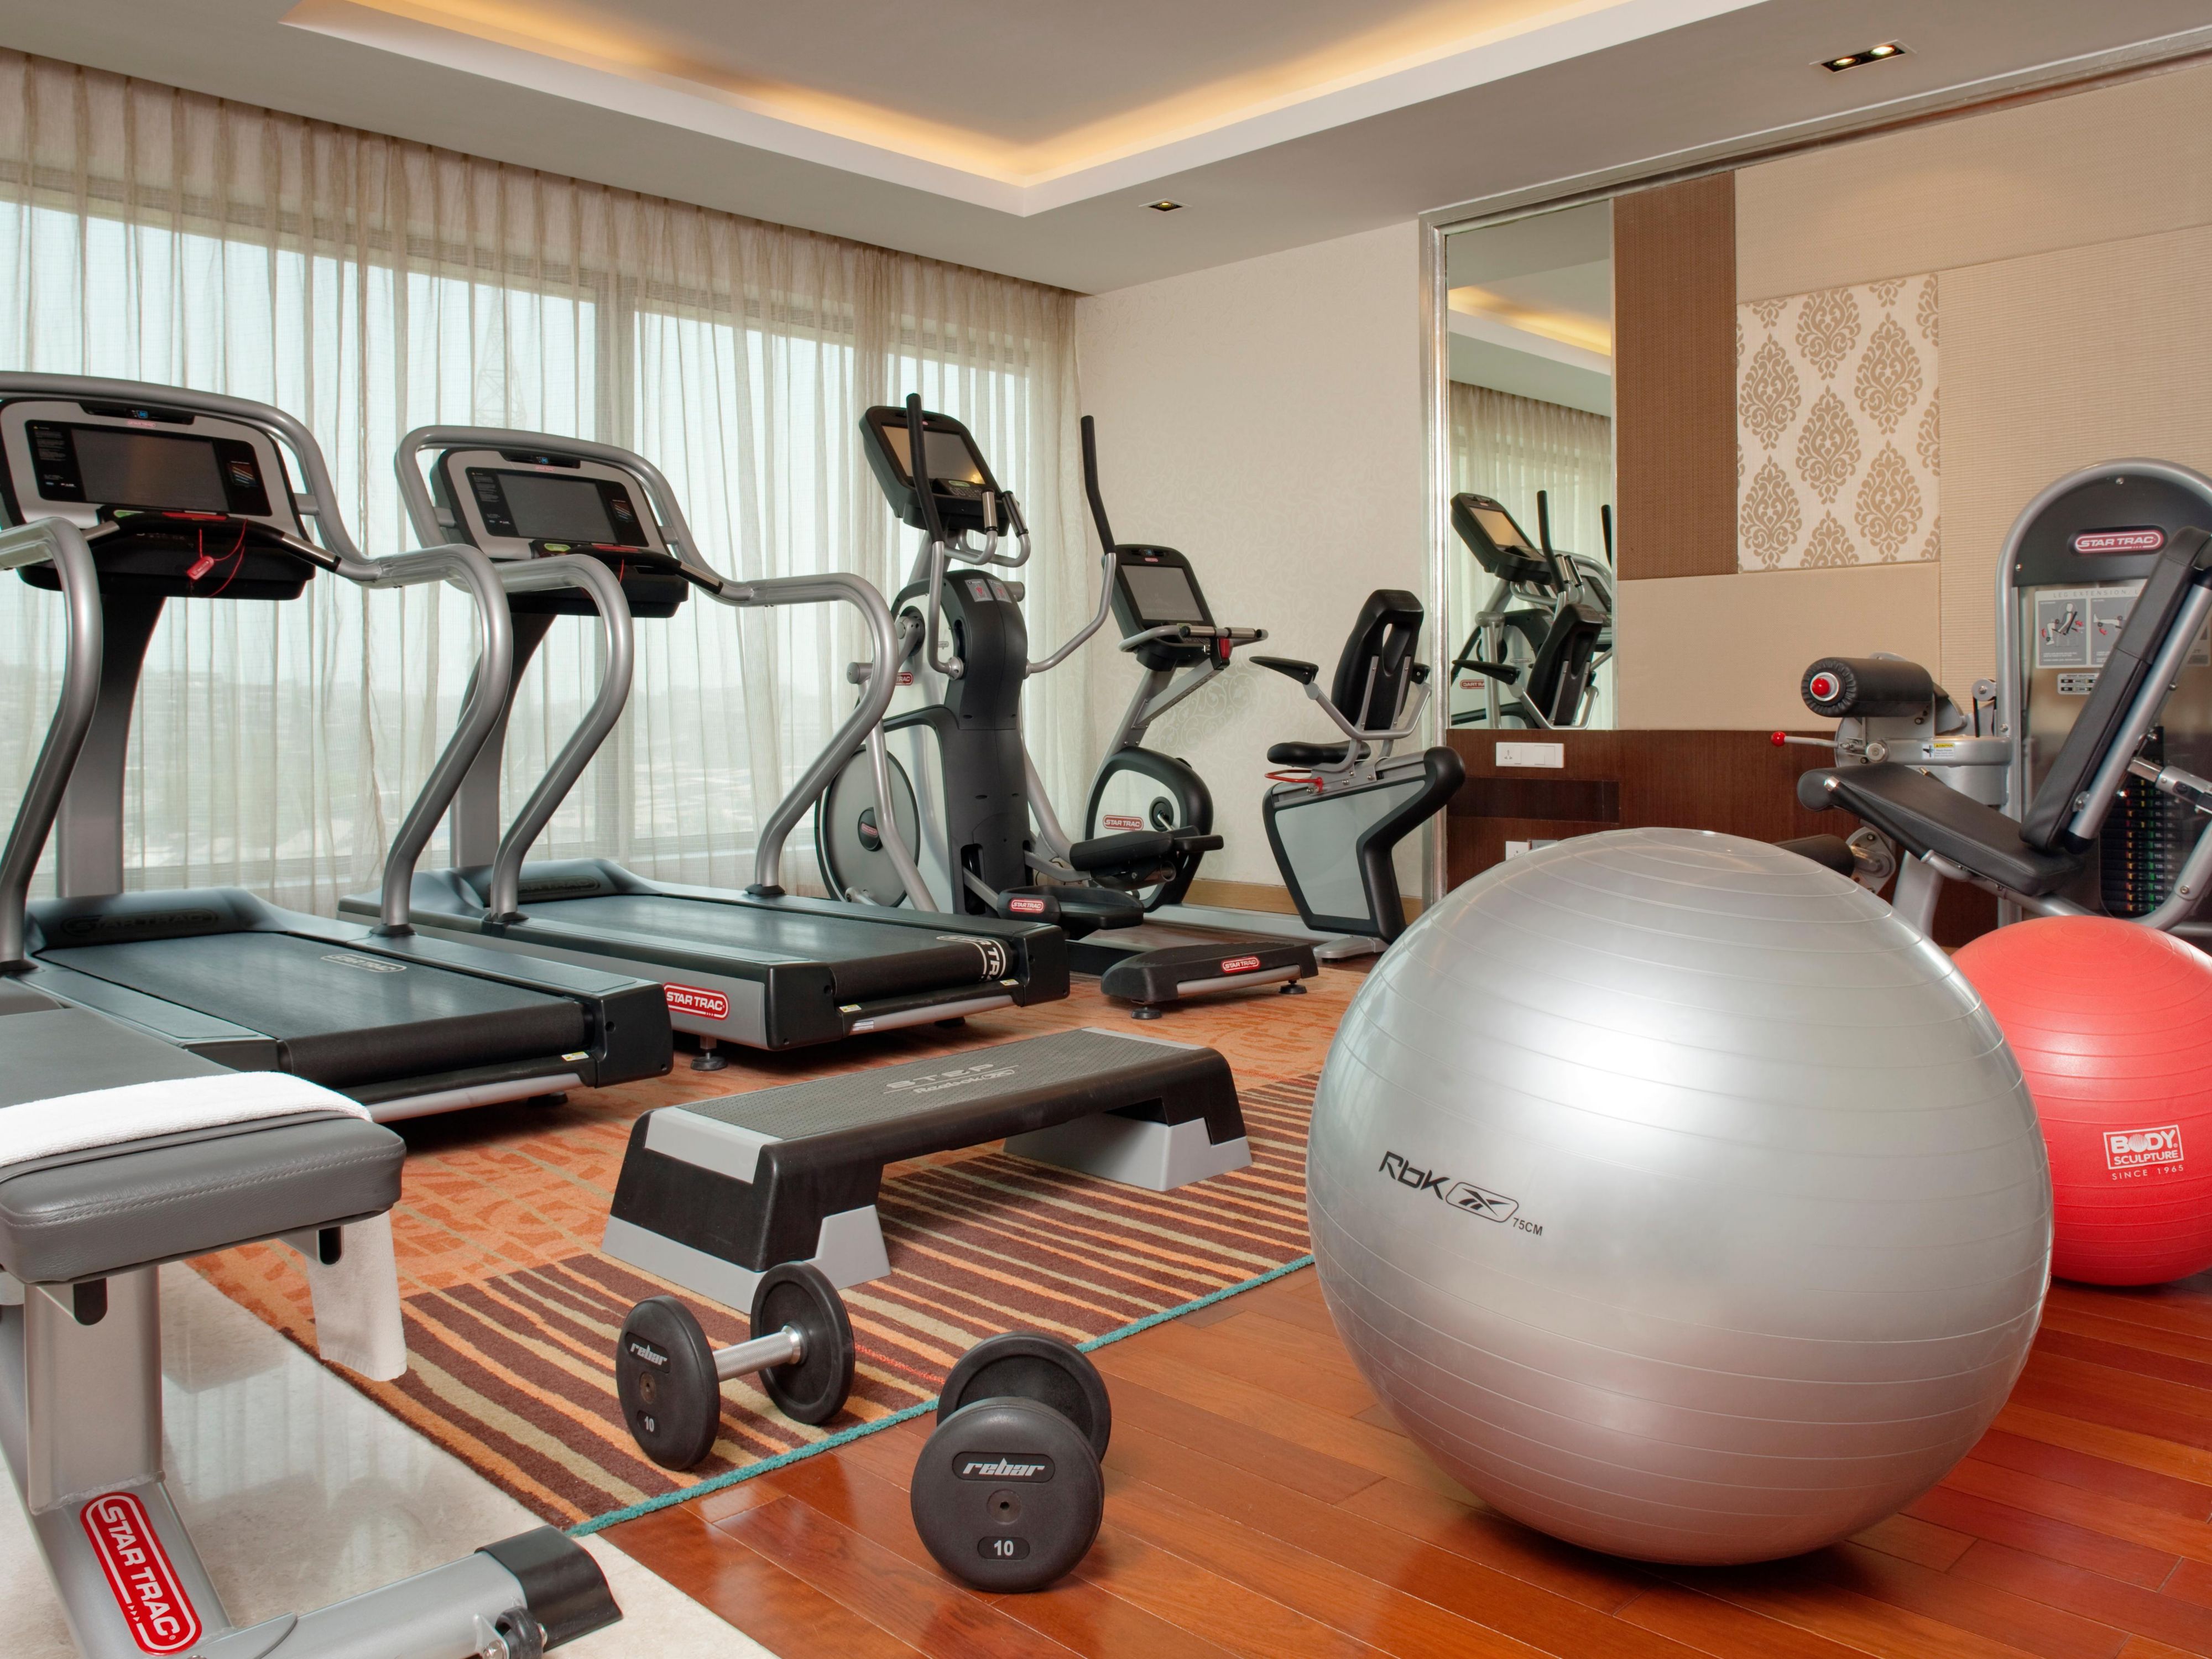 A well-equipped Fitness Centre with modern cardiovascular equipment and a range of fixed & free weight options is available at level 7 of the hotel. 